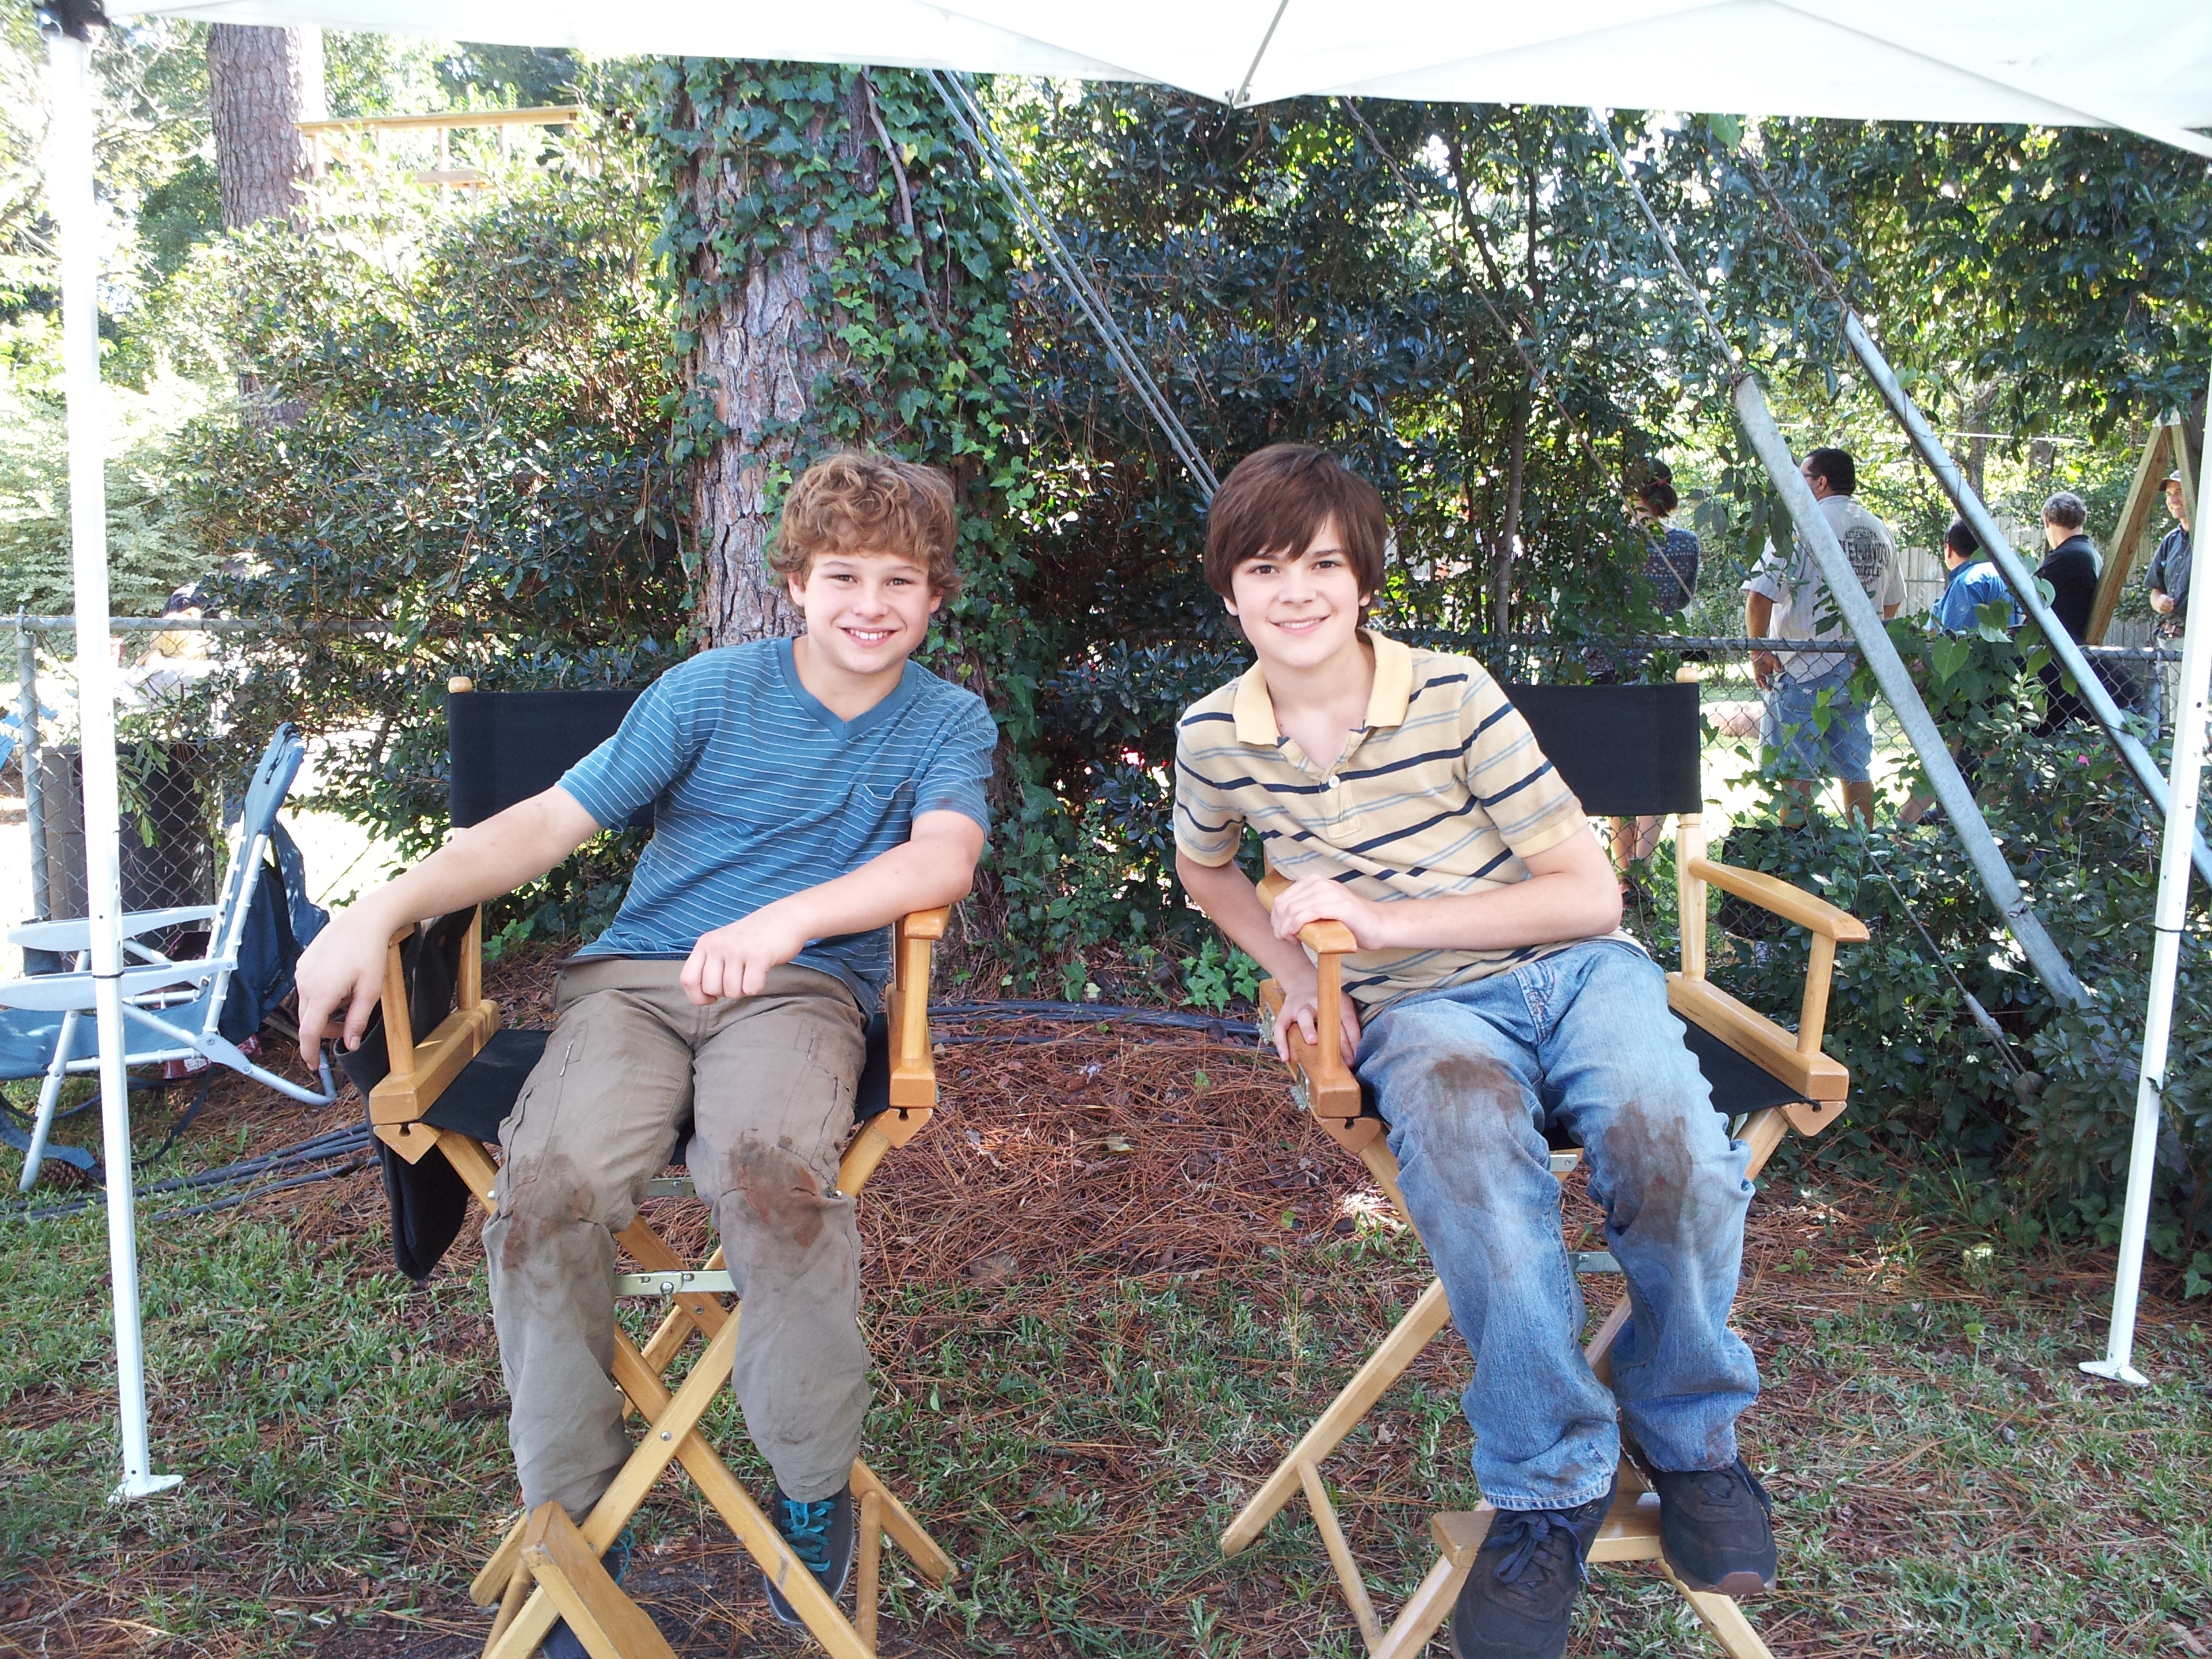 Perry Cox as Young Miles on set of NBC's Revolution